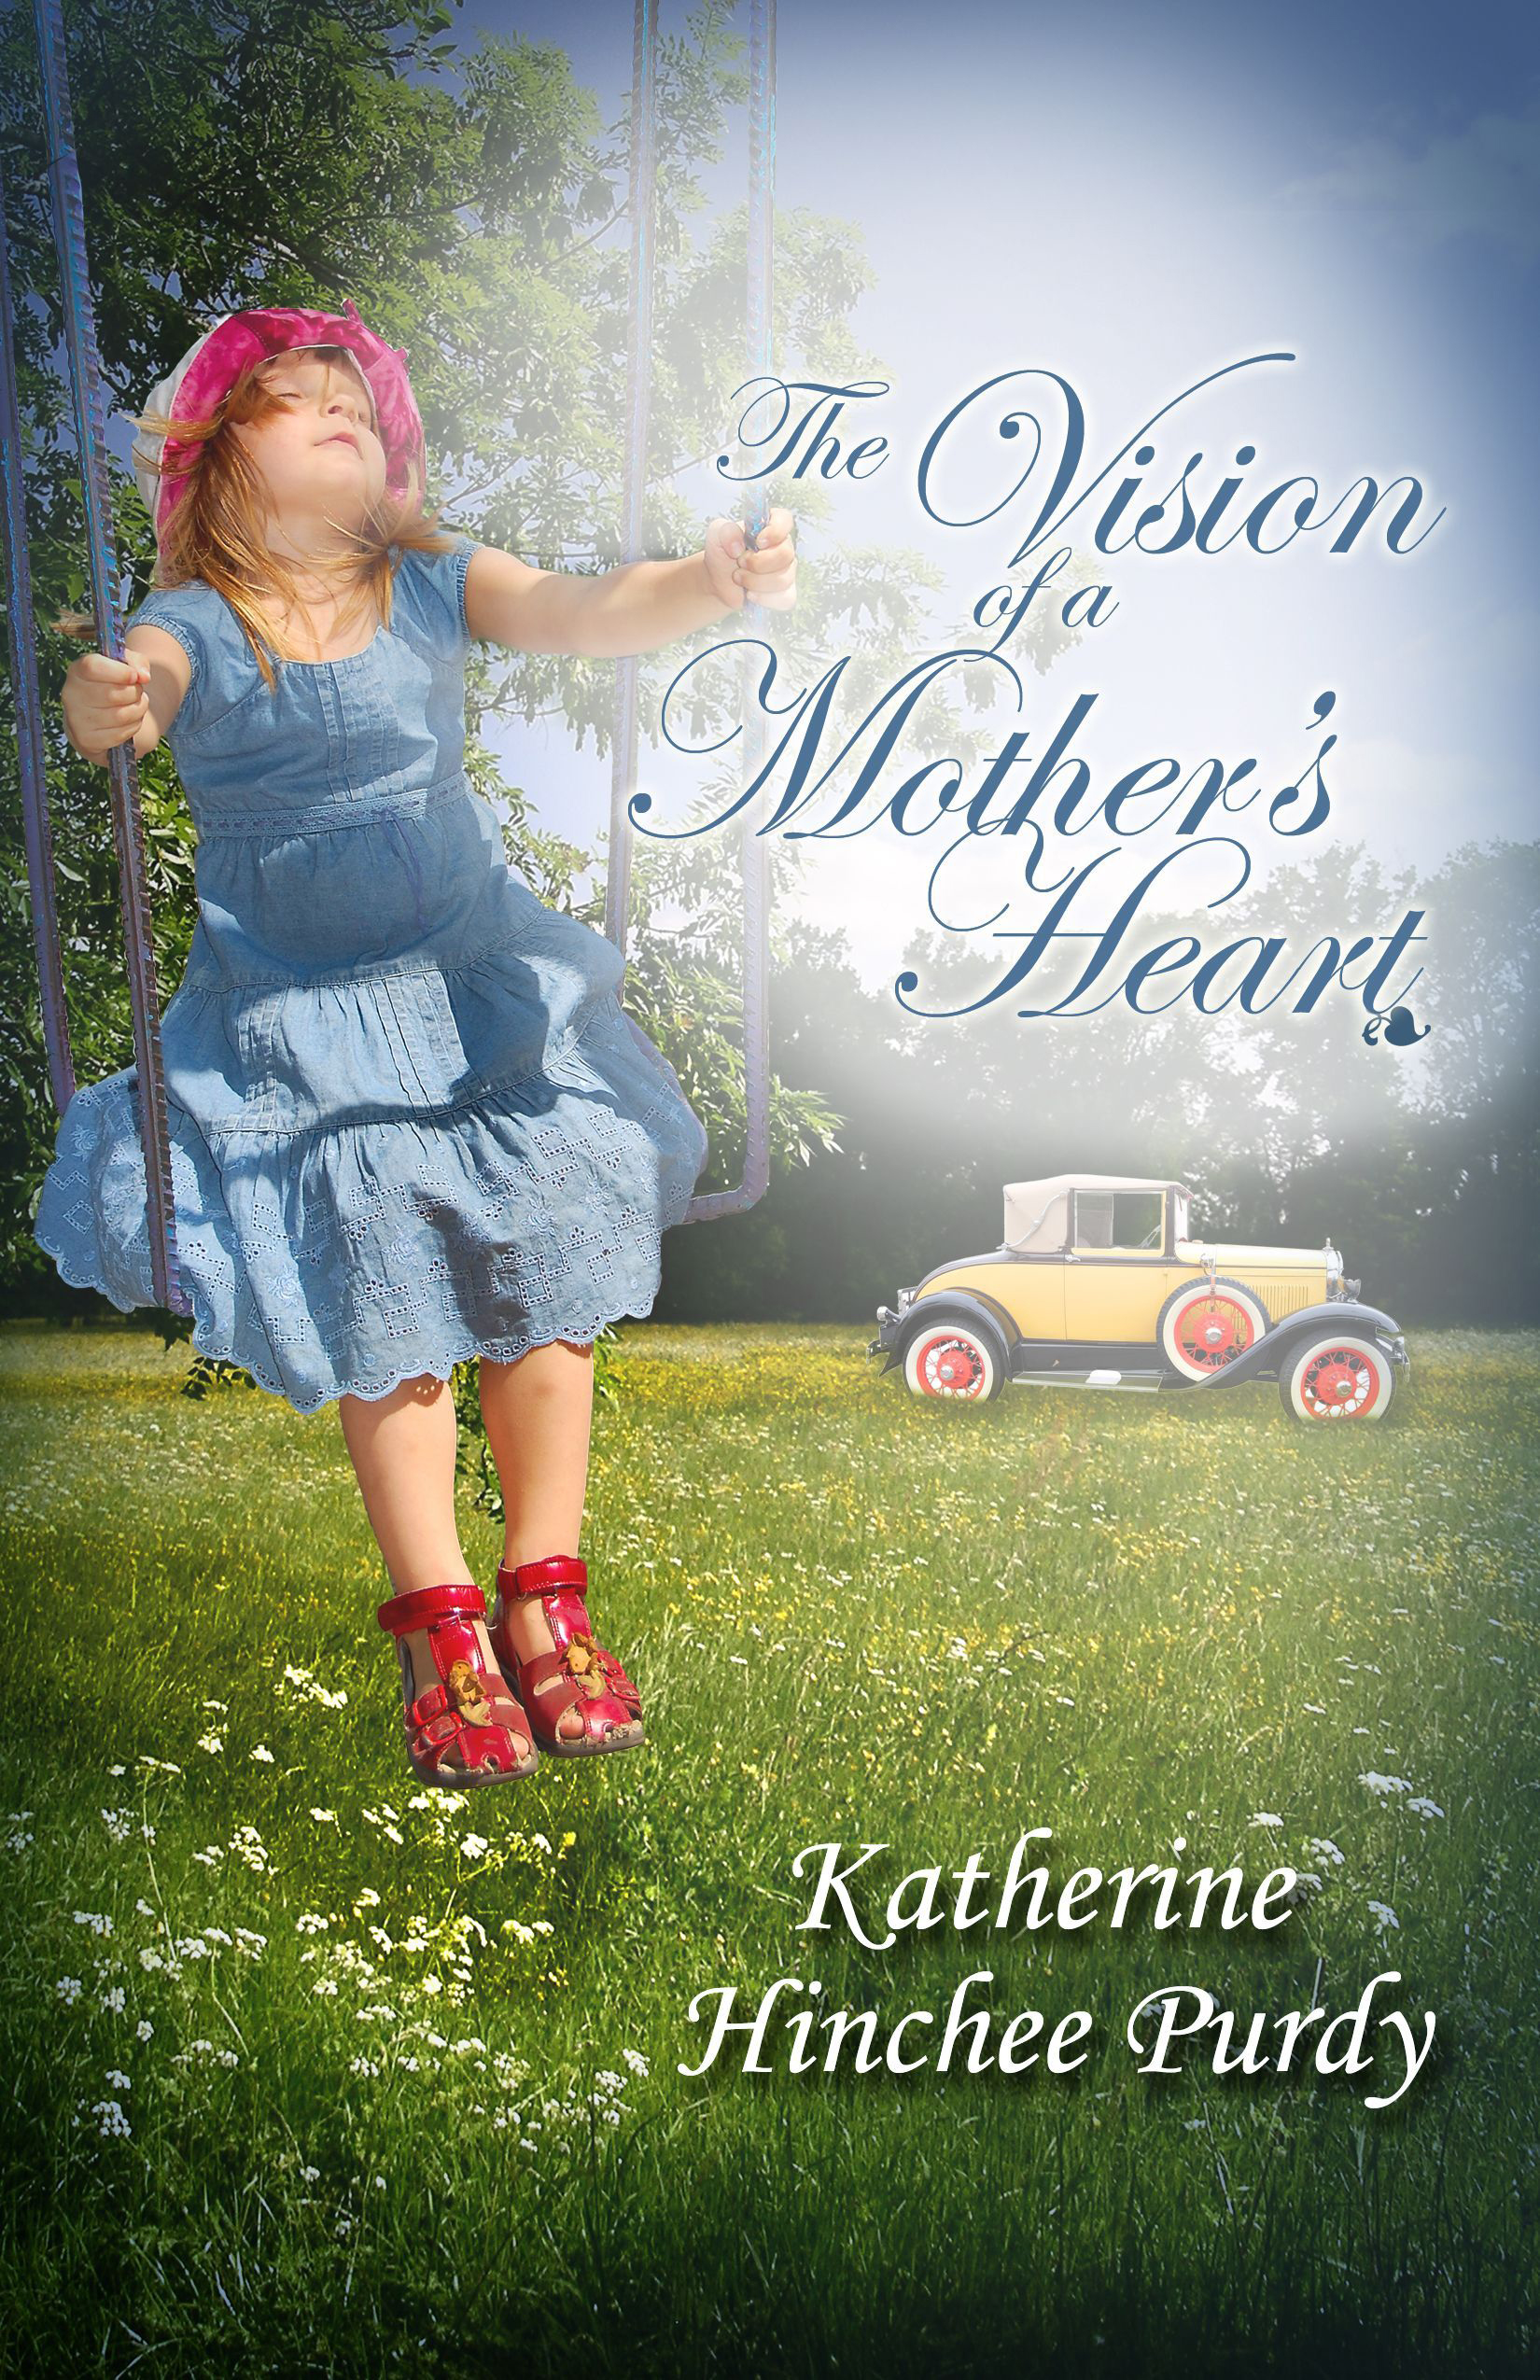 The Vision of a Mother's Heart by Katherine Hinchee Purdy (2)